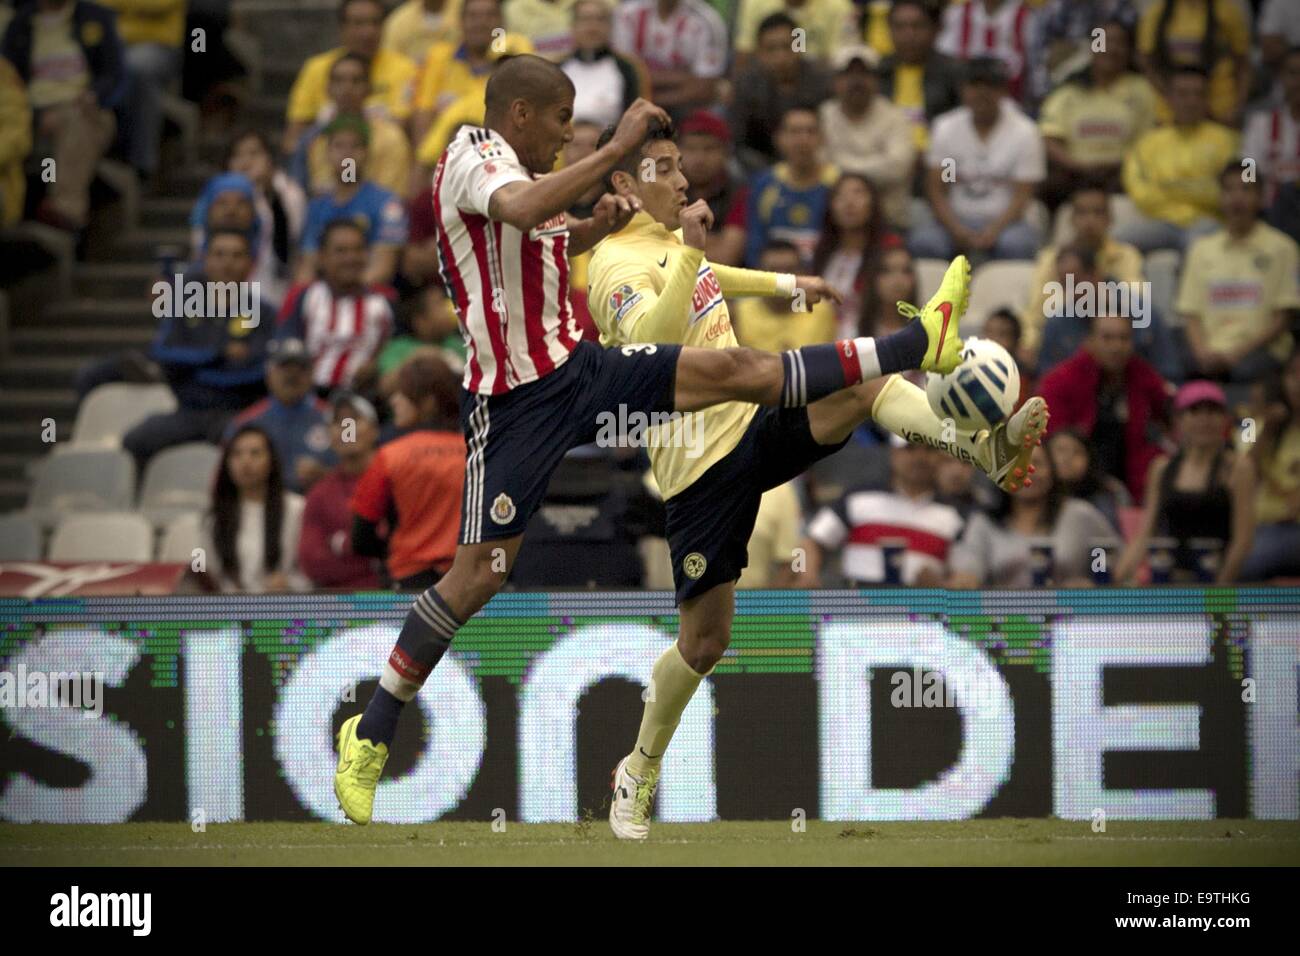 Mexico City, Mexico. 1st Nov, 2014. America's Rubens Sambueza (R) vies the ball with Carlos Salcido of Chivas during the match of the Day 15 of the Opening Tournament 2014 of the MX League, celebrated in the Azteca Stadium, in Mexico City, capital of Mexico, on Nov. 1, 2014. Credit:  Alejandro Ayala/Xinhua/Alamy Live News Stock Photo